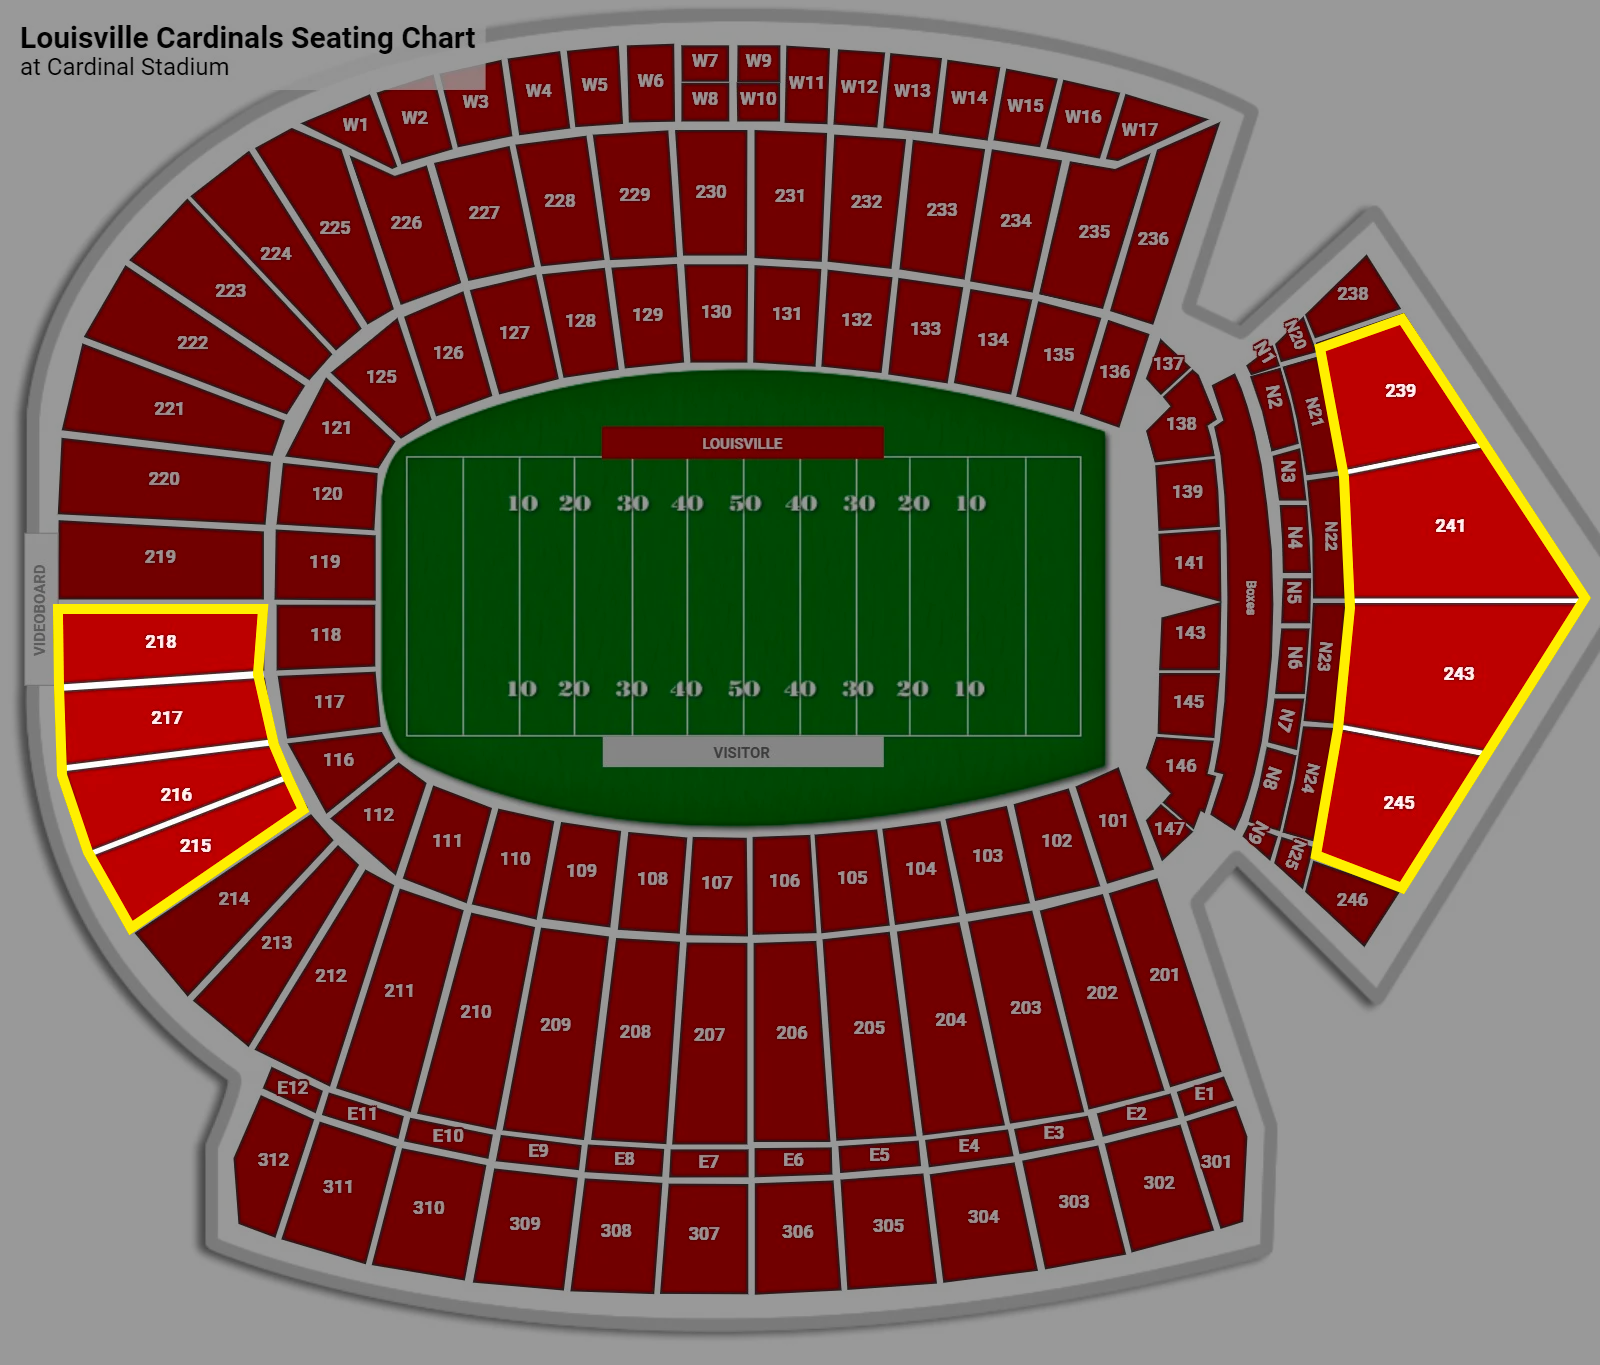 University of Louisville - UofL vs. NC State Tailgate and Football